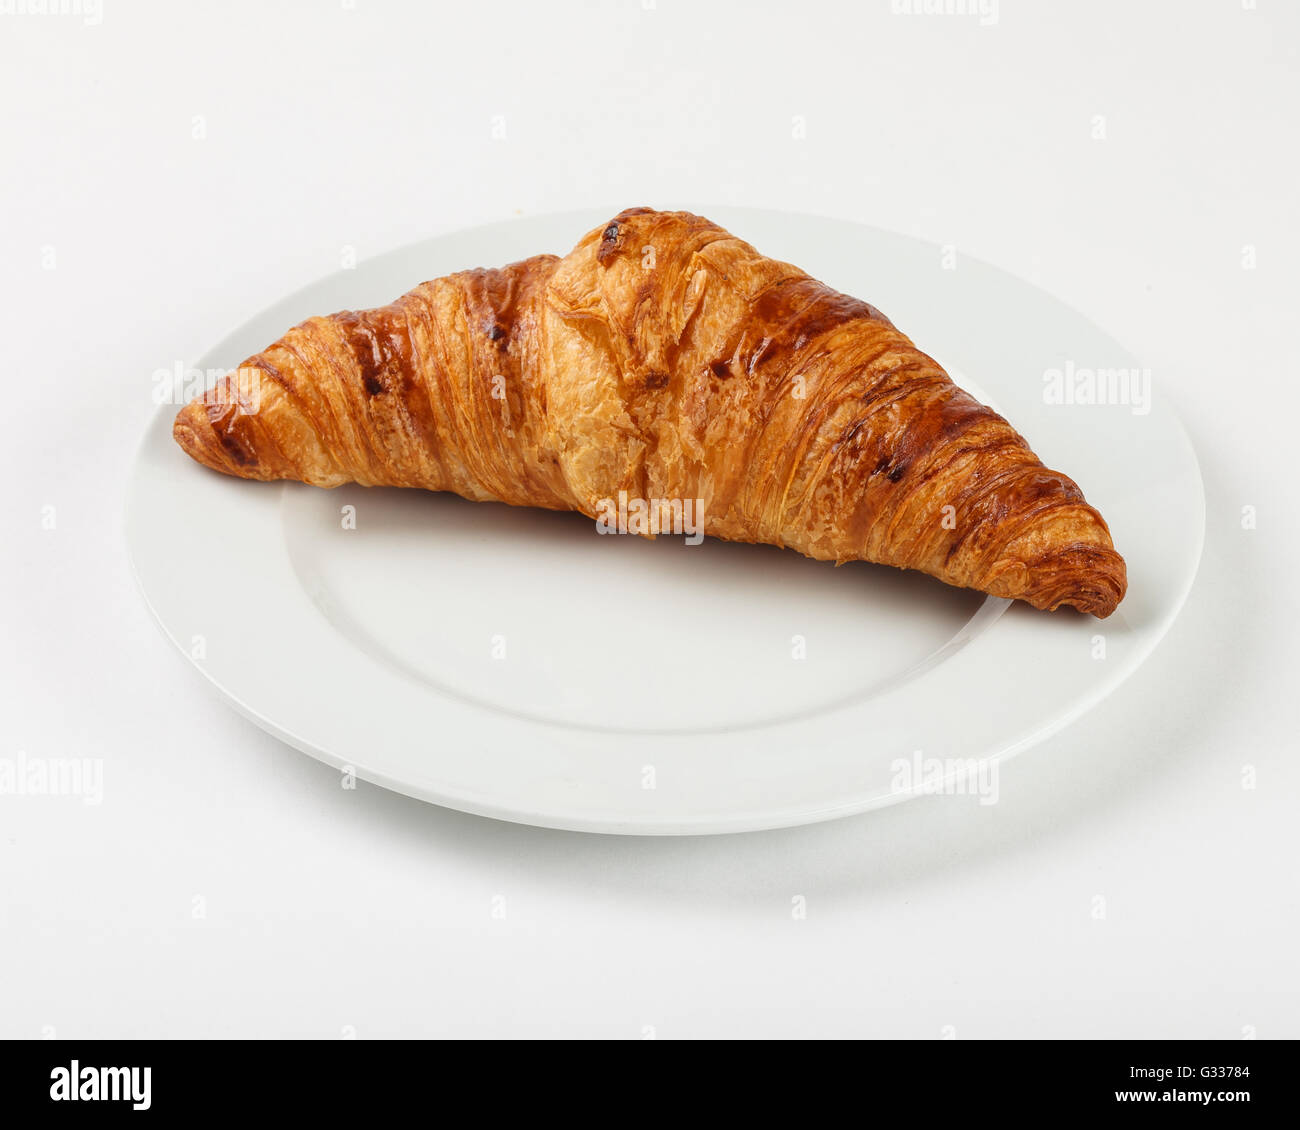 Delicious croissant on the plate on white background. Close up side view. Stock Photo